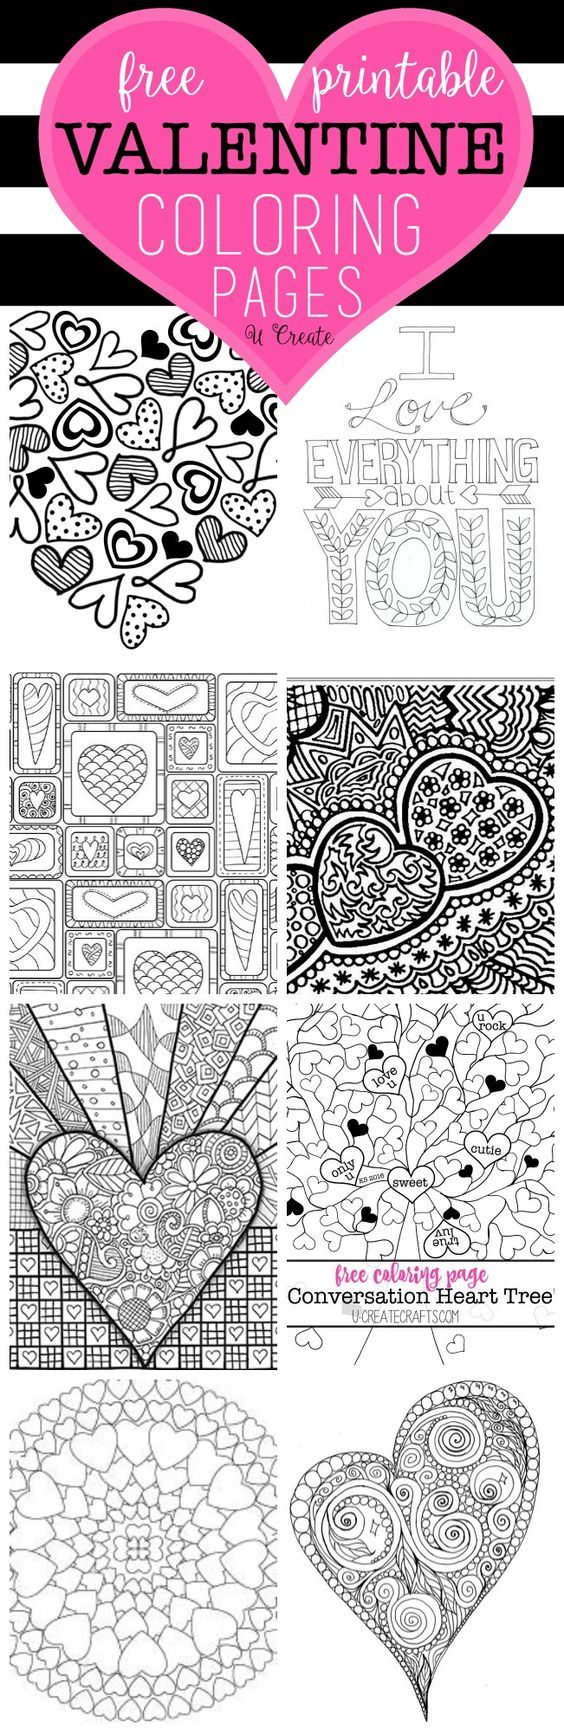 Free Valentine Coloring Pages (U Create) | Coloring Pages ...